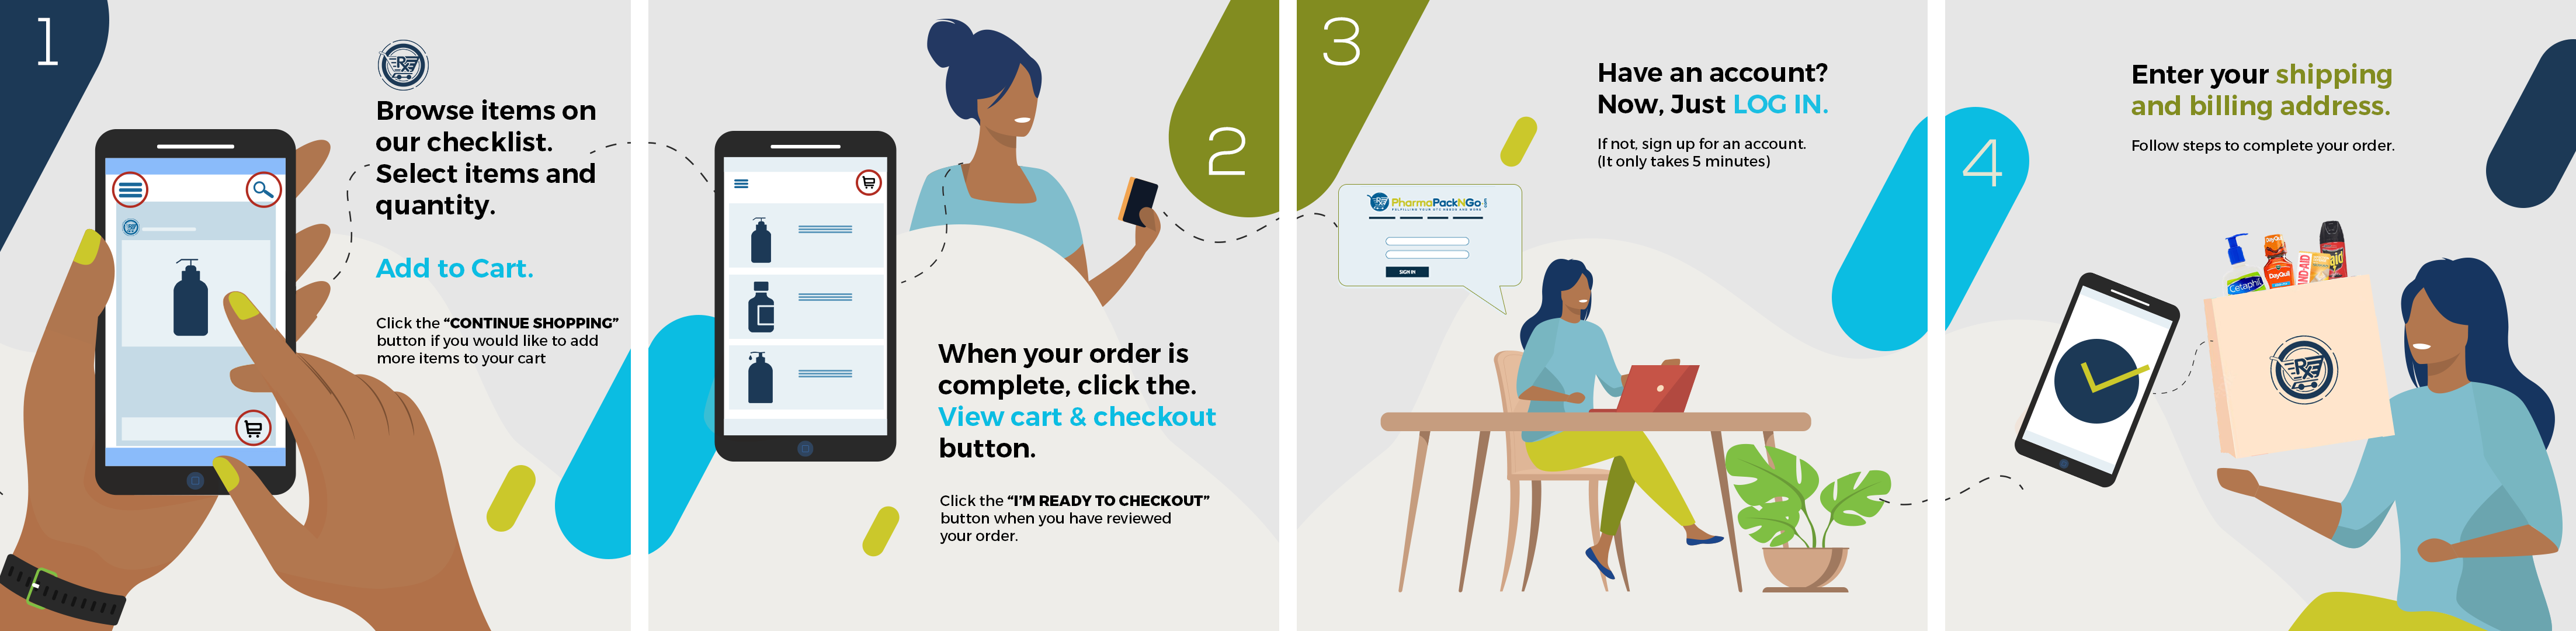 how-to-order-from-our-checklist.png